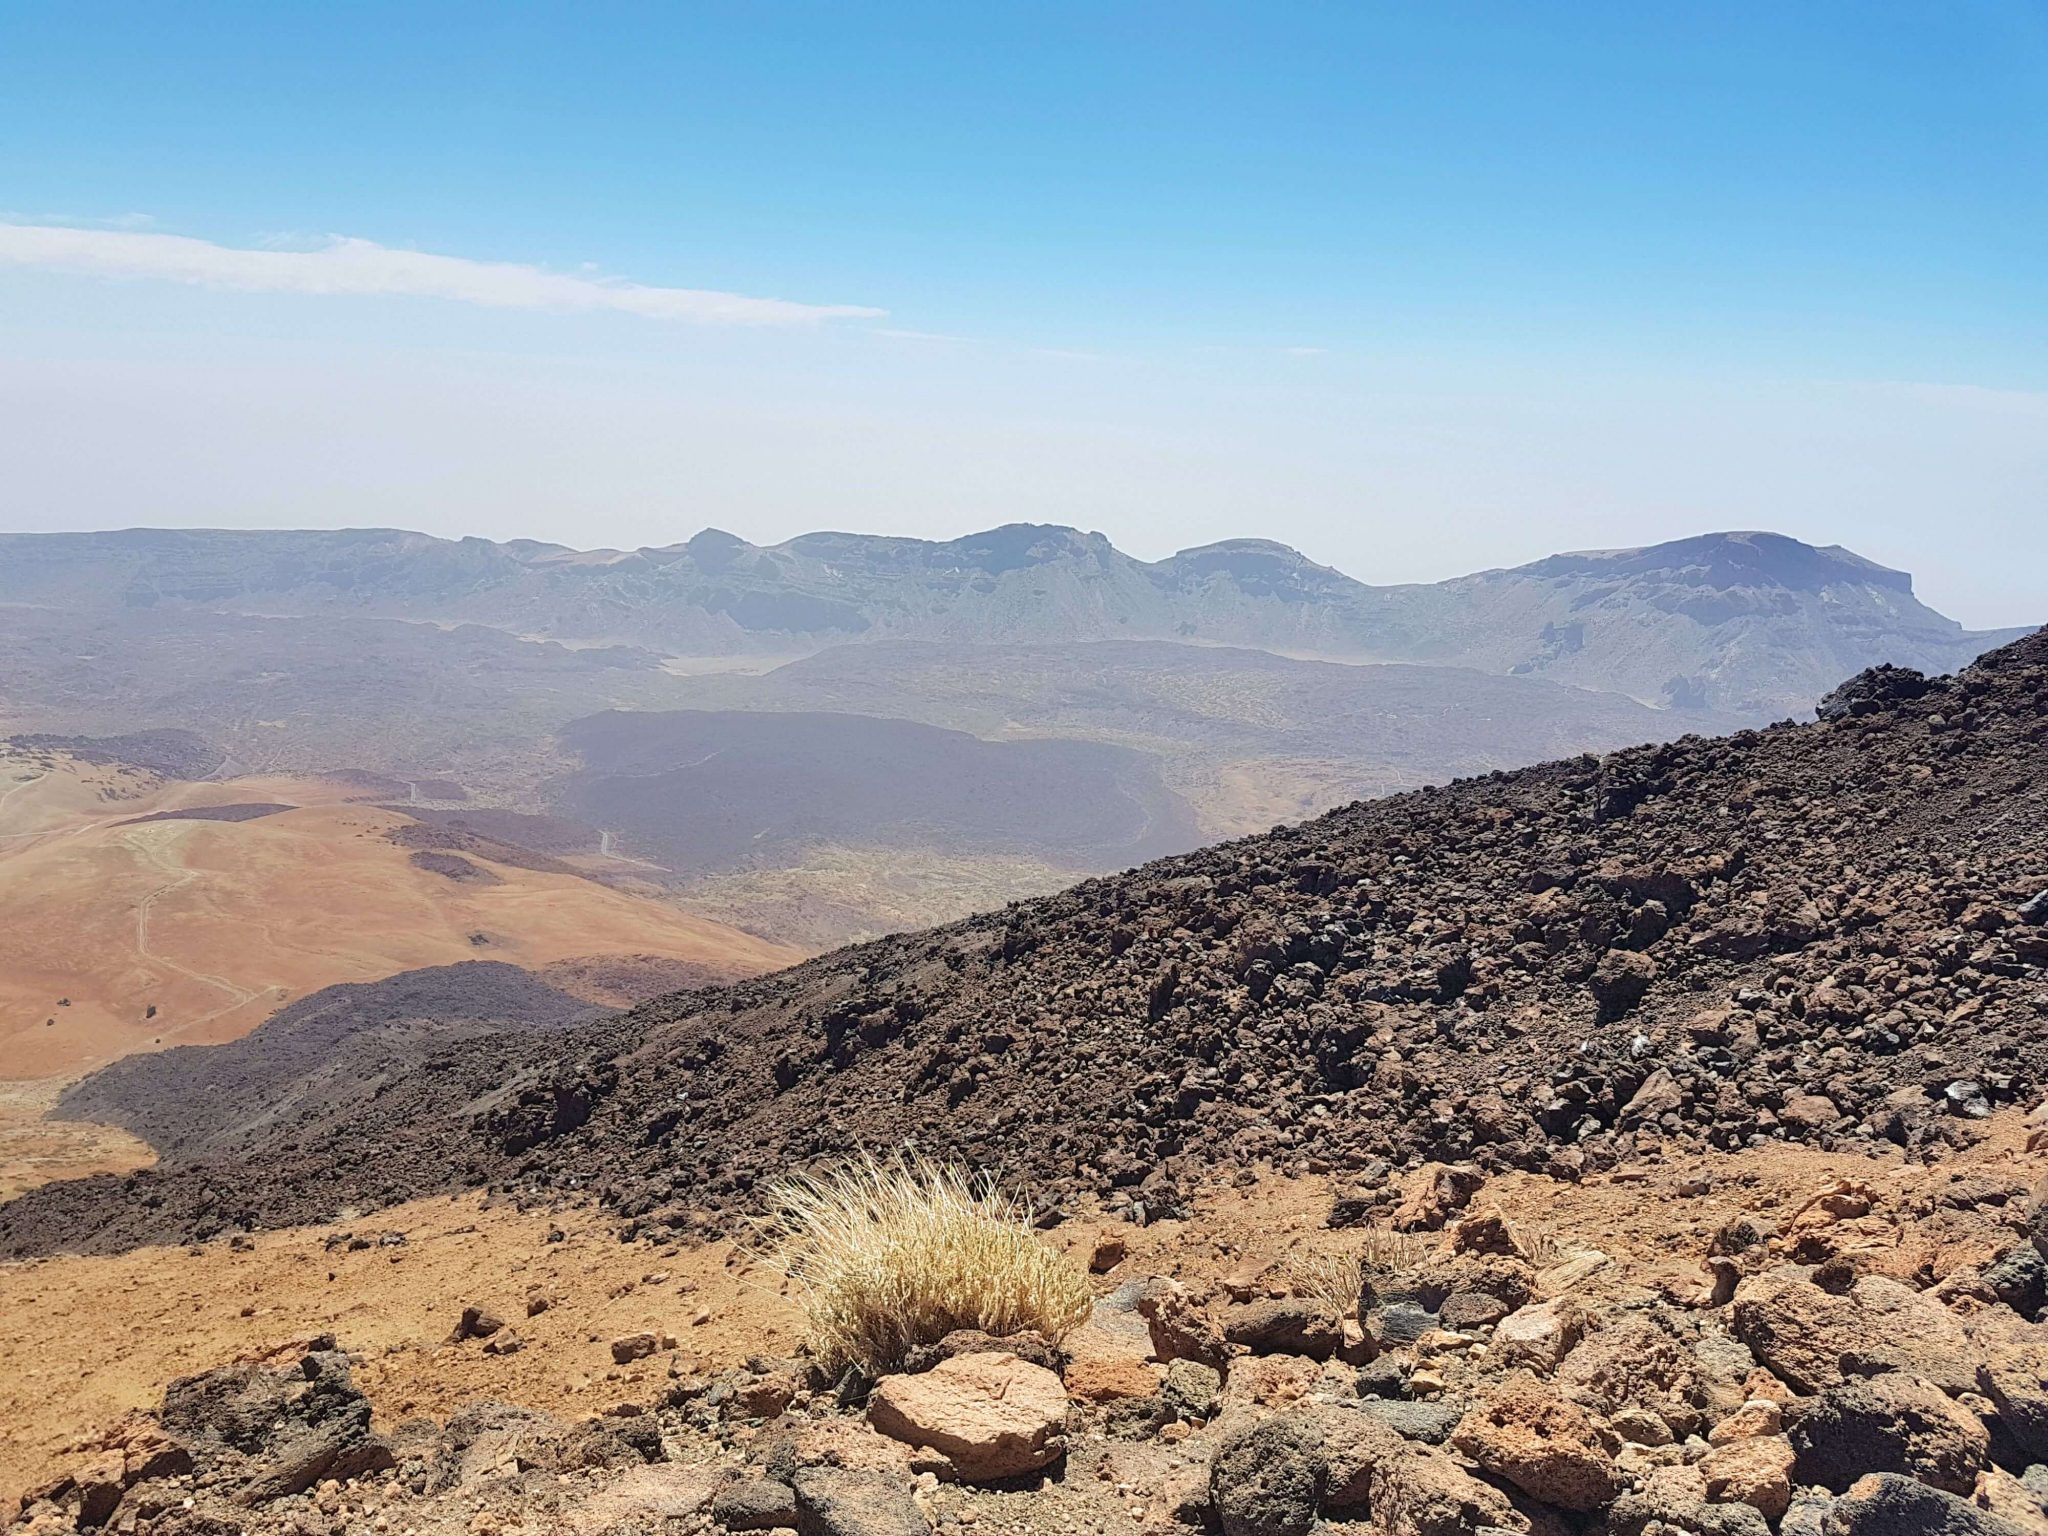 View of Teide